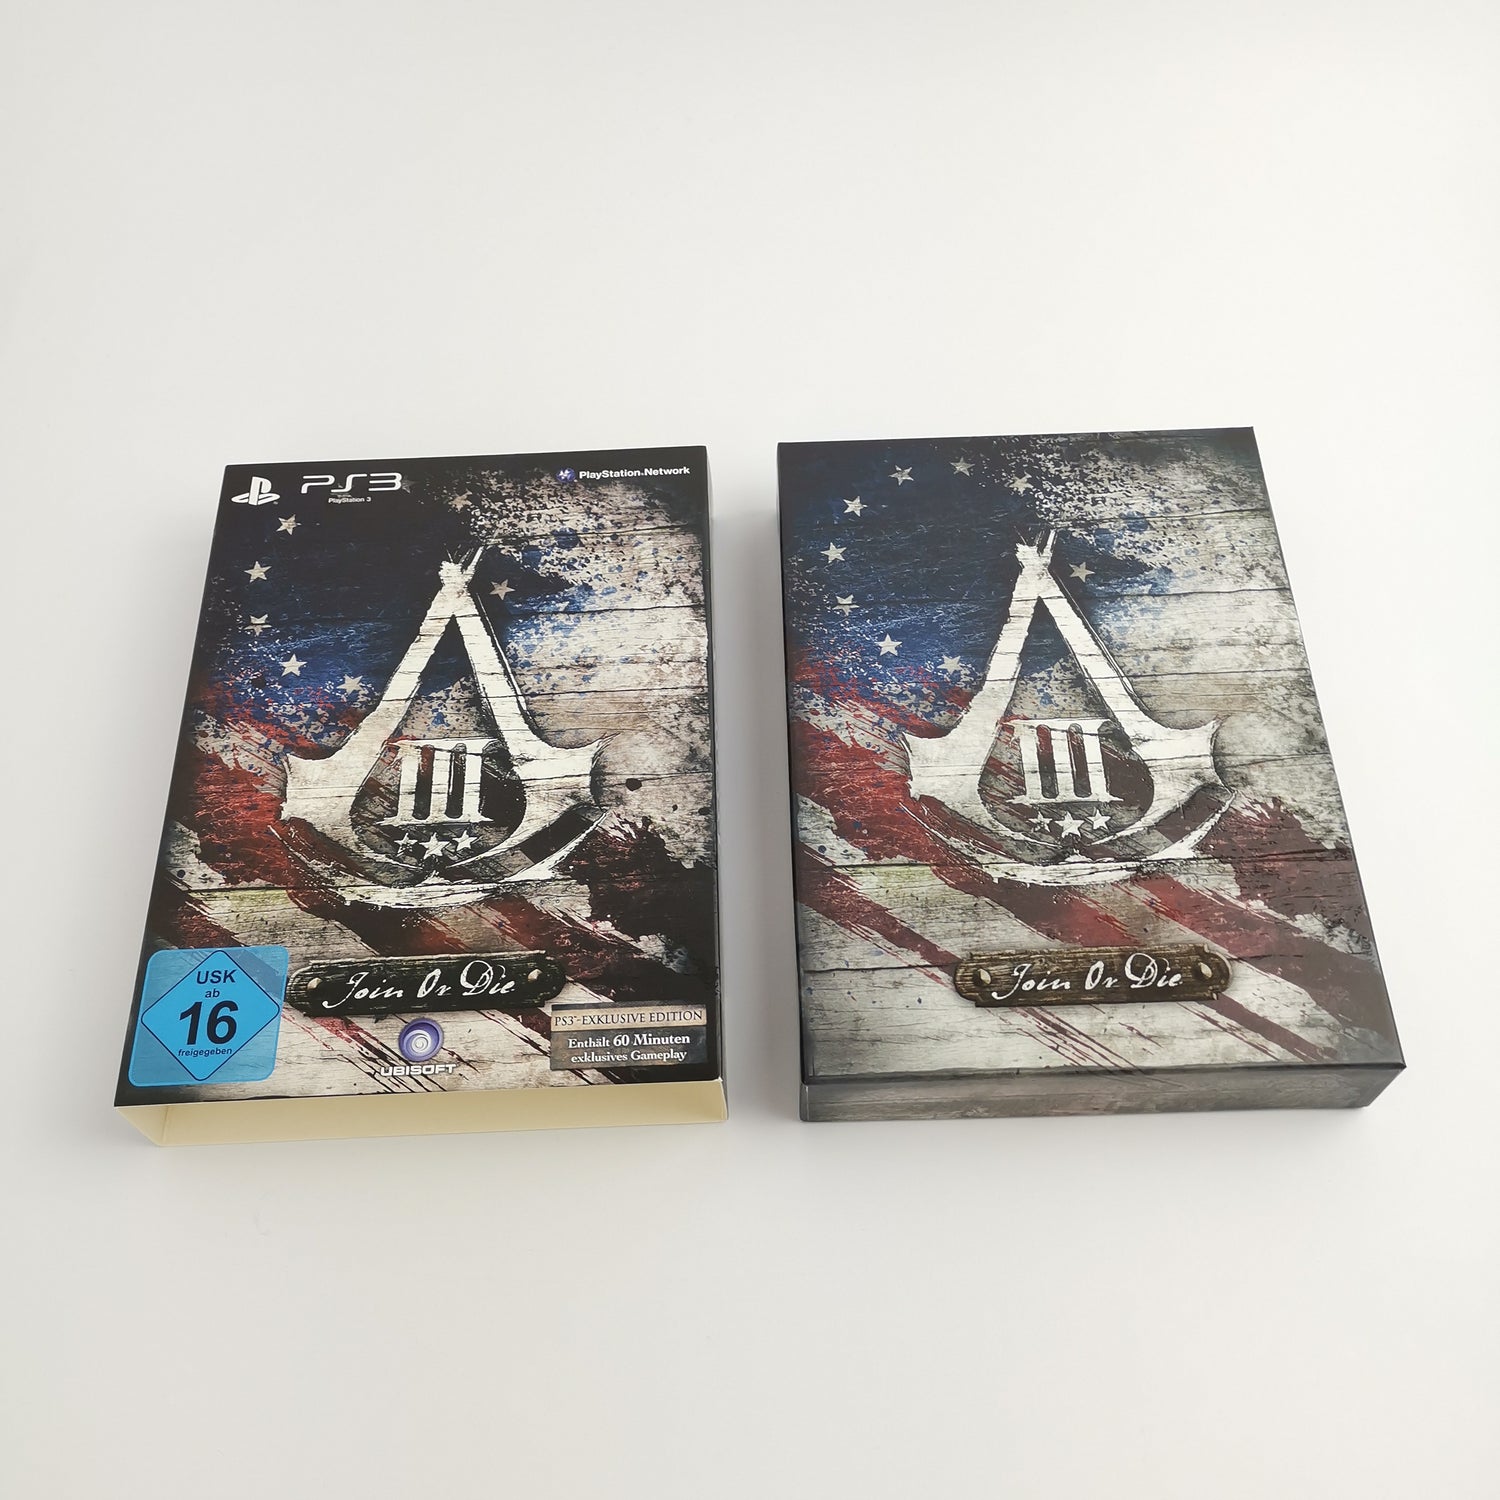 Sony Playstation 3: Assassins Creed 3 Join or Die Without Game! | PS3 original packaging